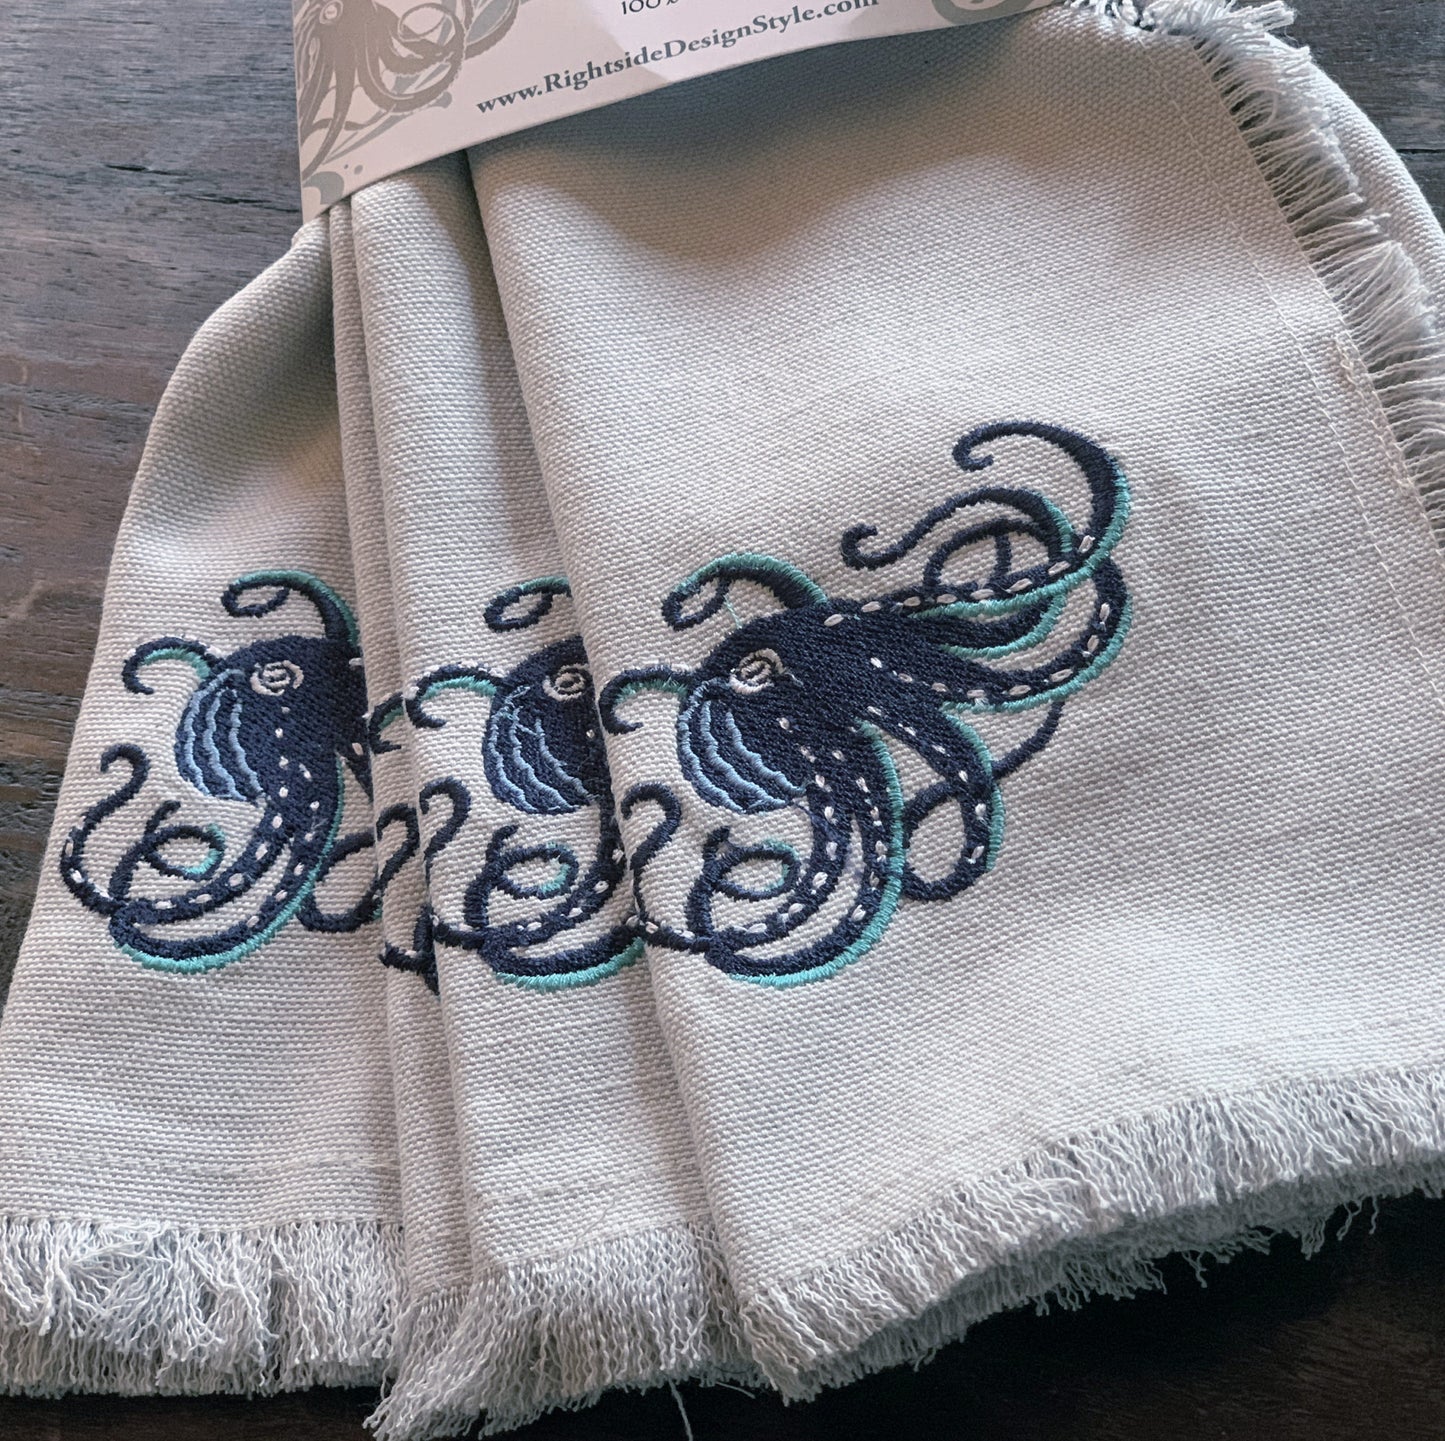 Navy octopus with teak tentacles embroidered on fringed grey cotton napkins.